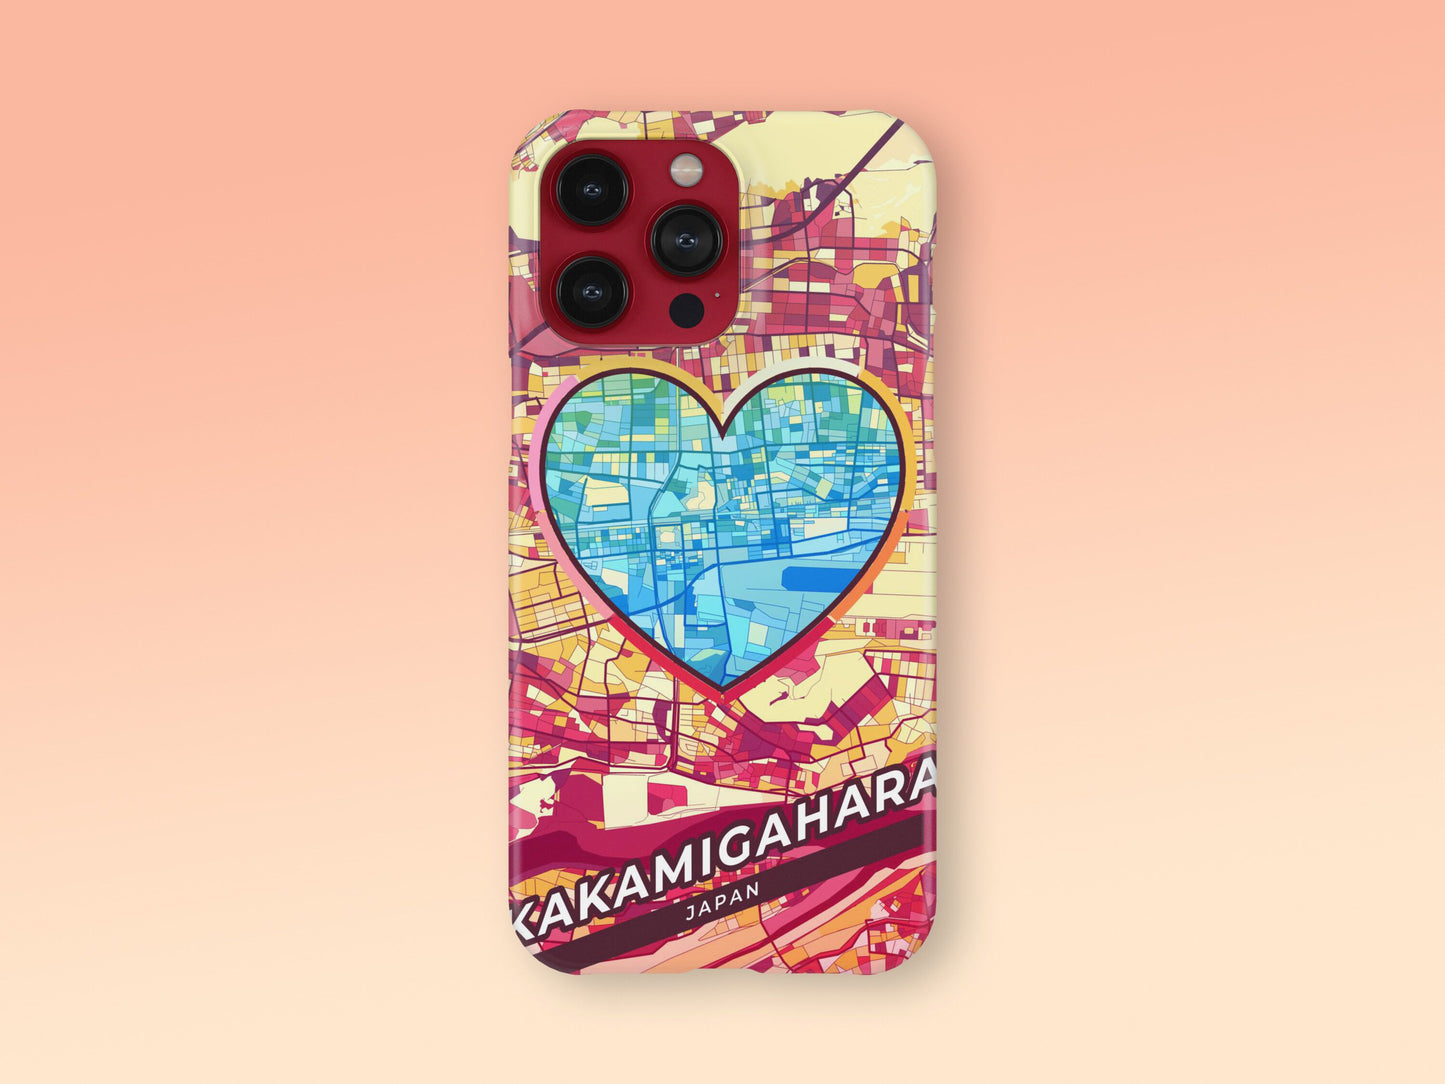 Kakamigahara Japan slim phone case with colorful icon. Birthday, wedding or housewarming gift. Couple match cases. 2